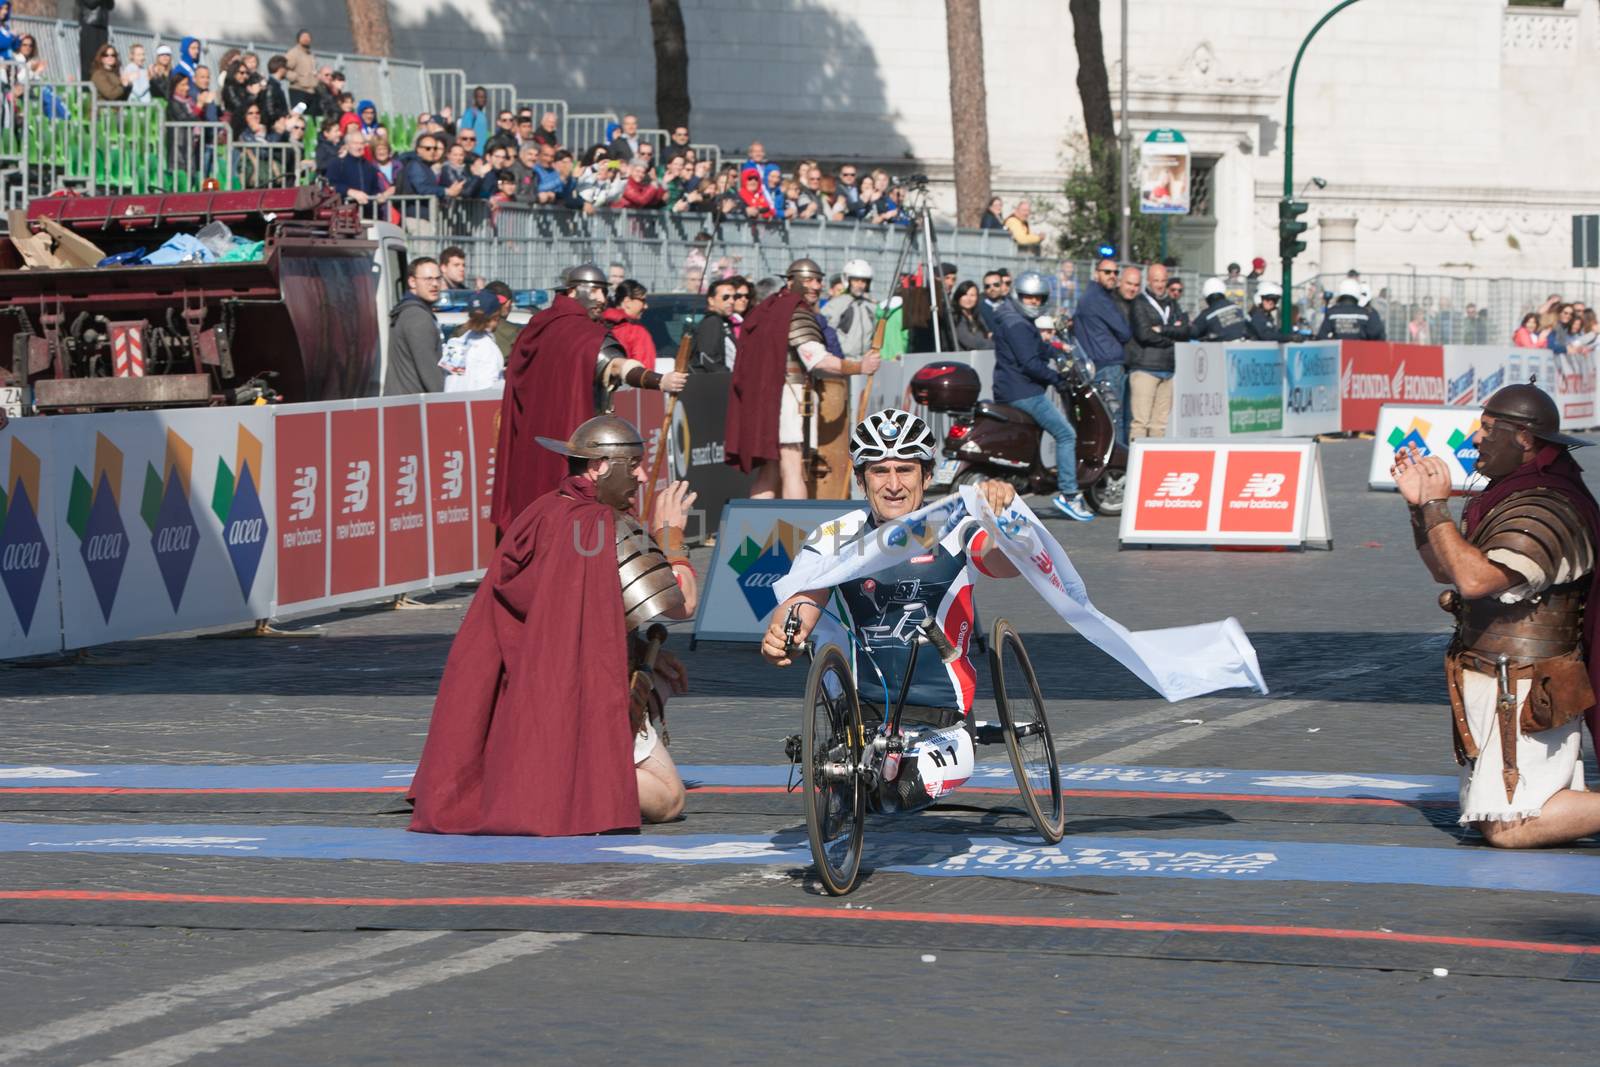 ITALY, Rome: Italian handbiker and former Formule 1 pilot Alexandro Zanardi crosses the finish line of Rome City Marathon in Rome on April 10, 2016. He won the first position in the handisport category with a new record of 1h09'15.